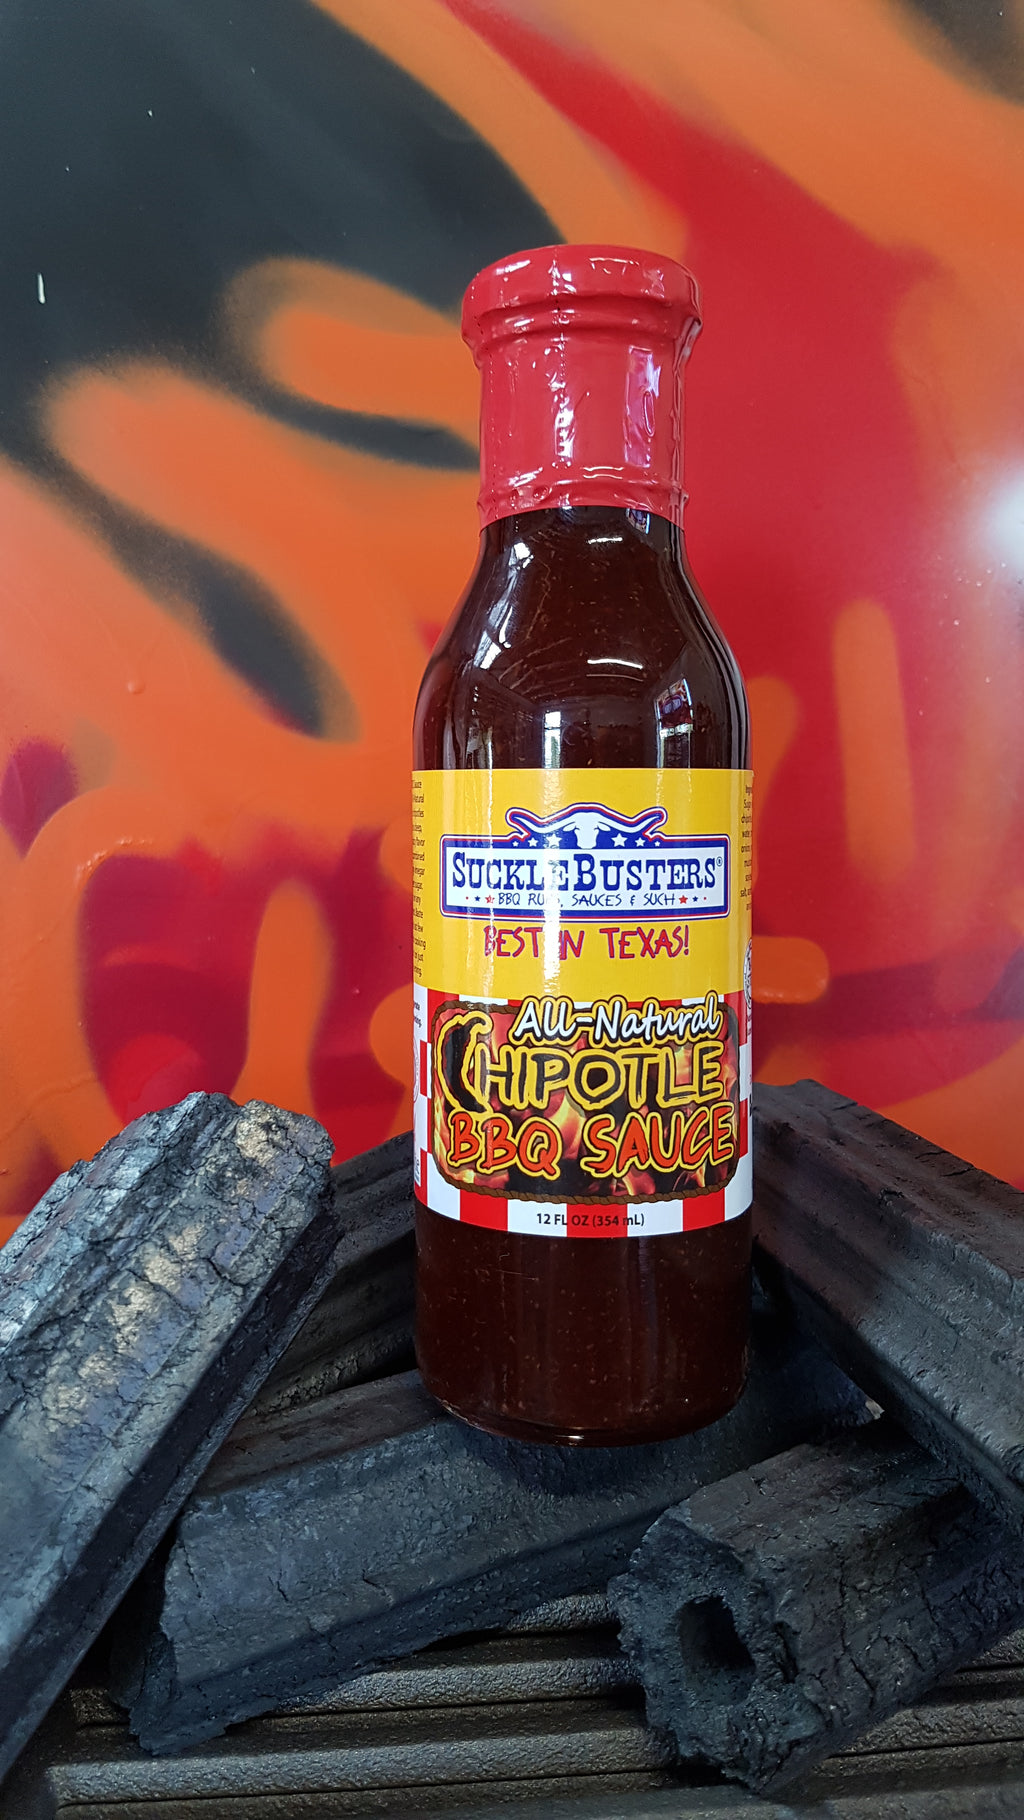 All Natural Chipotle BBQ Sauce 354g by Sucklebusters